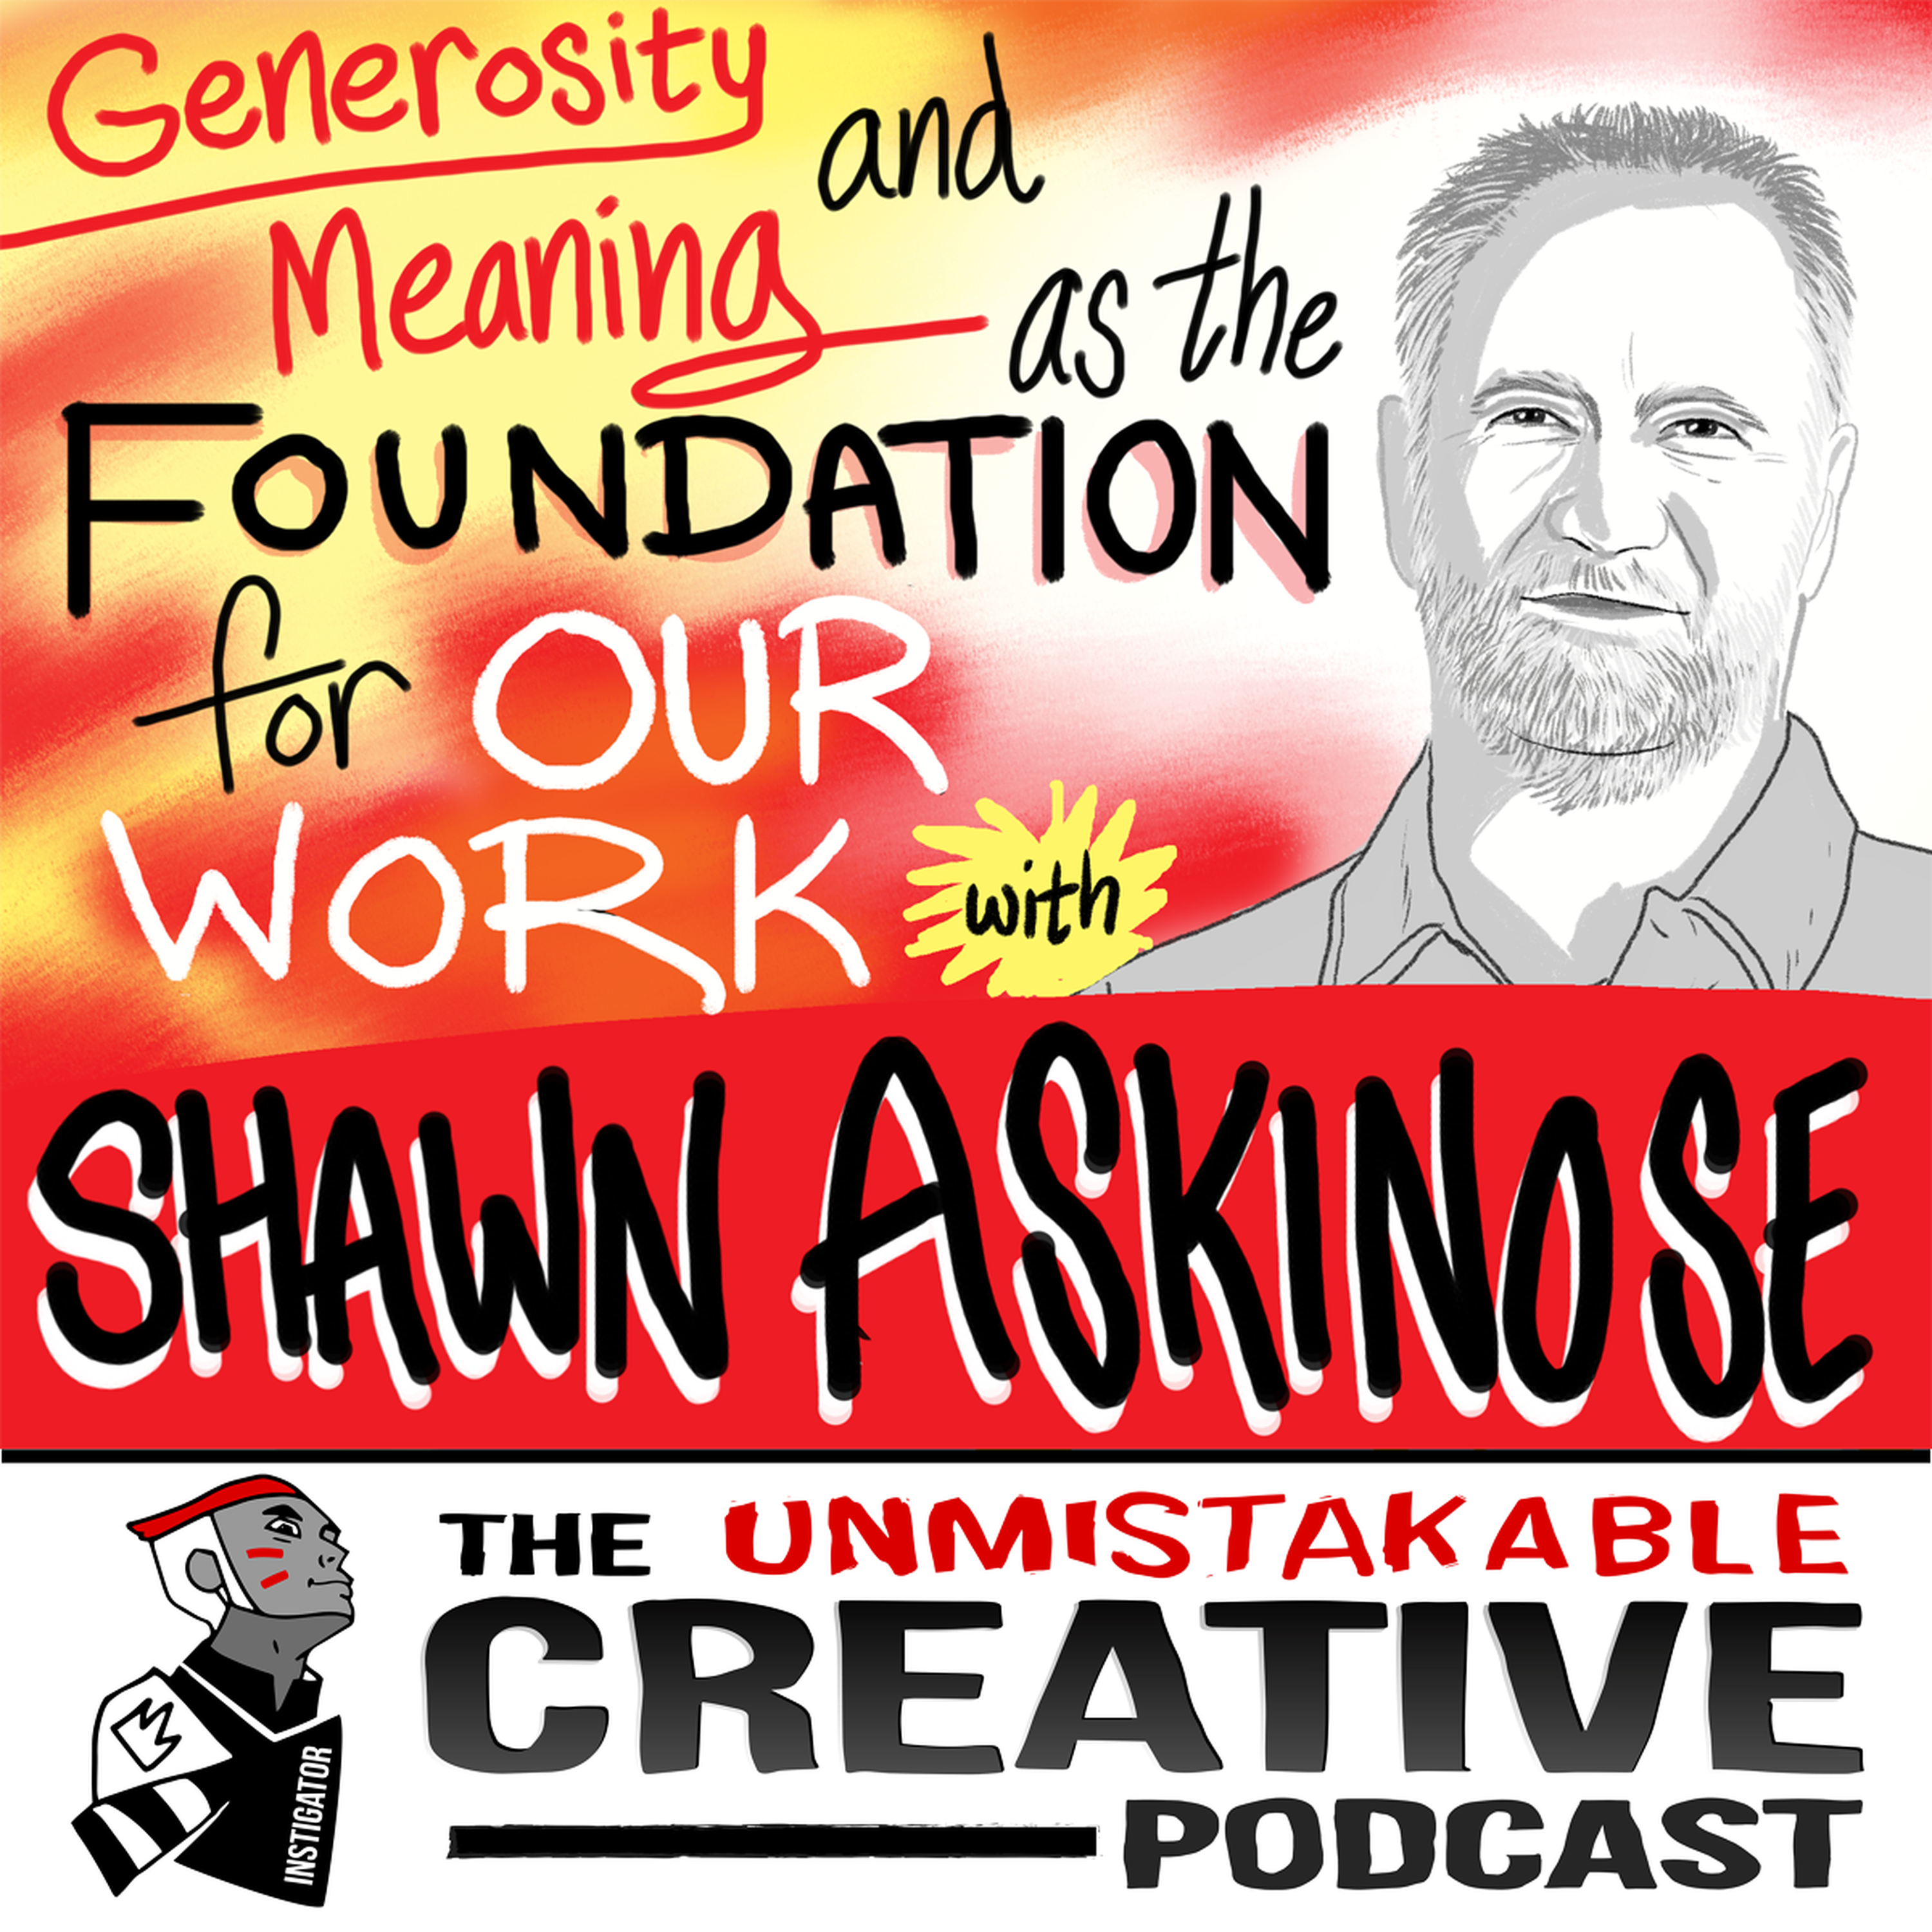 Shawn Askinosie: Generosity and Meaning as the Foundation for Our Work Image